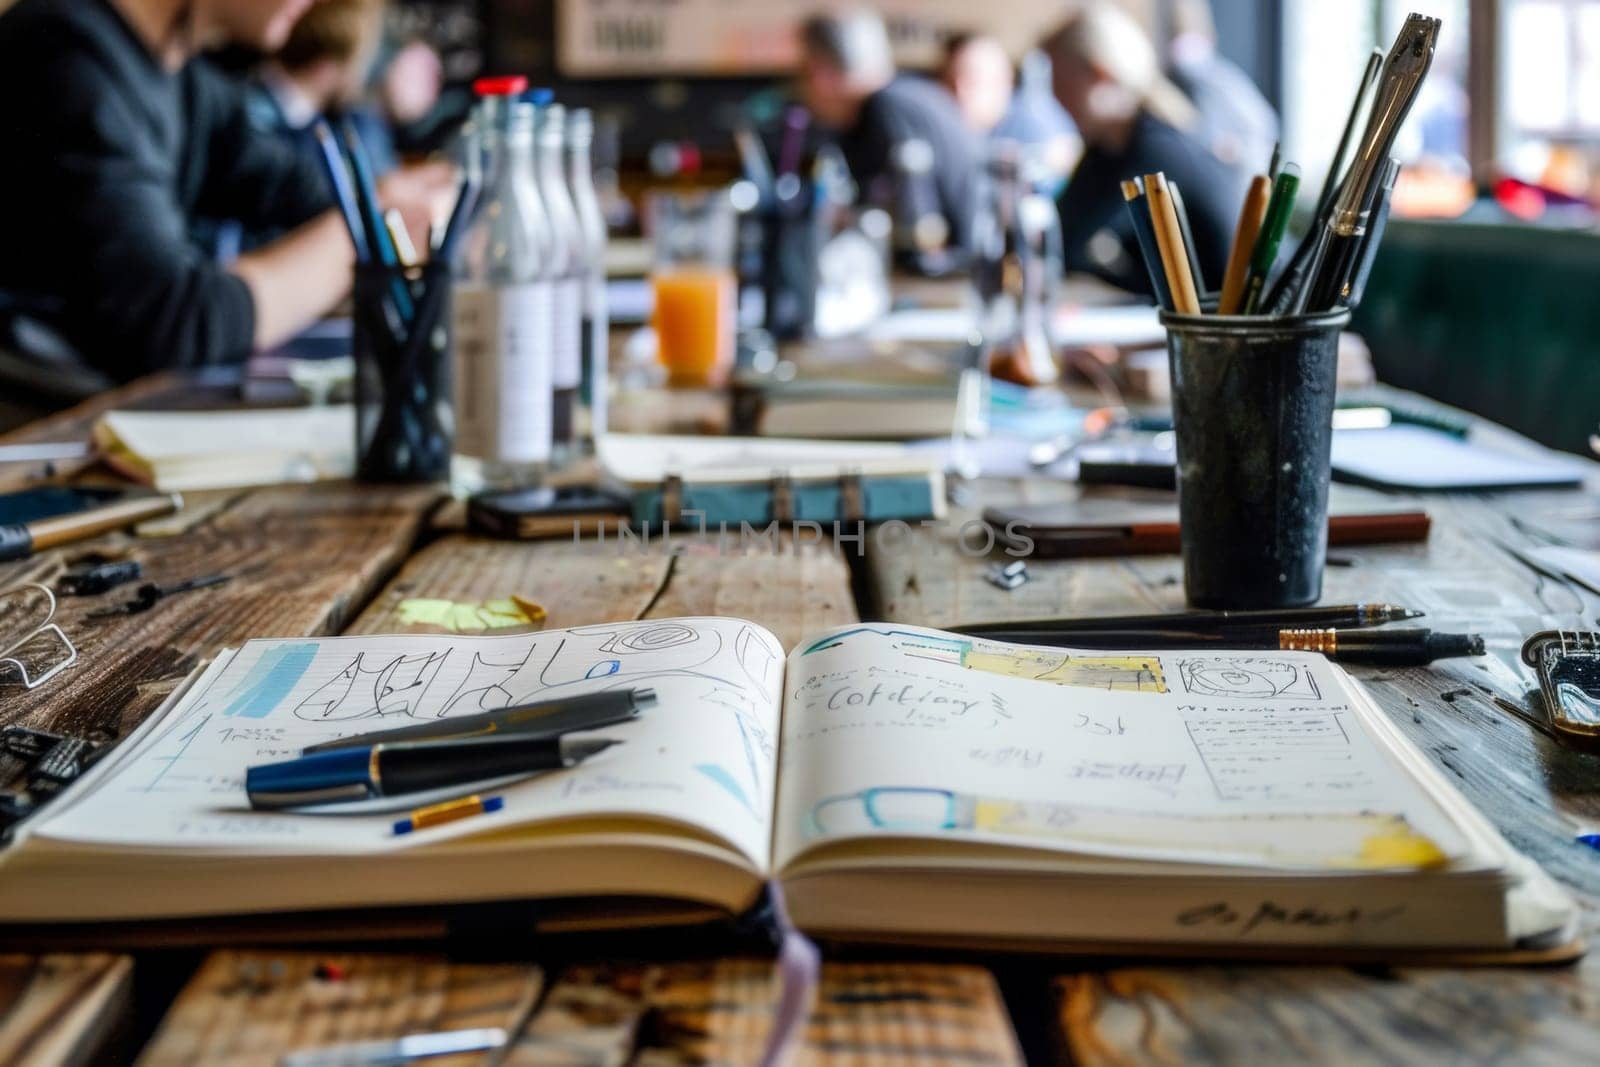 An open notebook filled with sketches and writing ideas lies amidst a cluttered table with pens and art supplies, capturing the essence of a creative brainstorming session